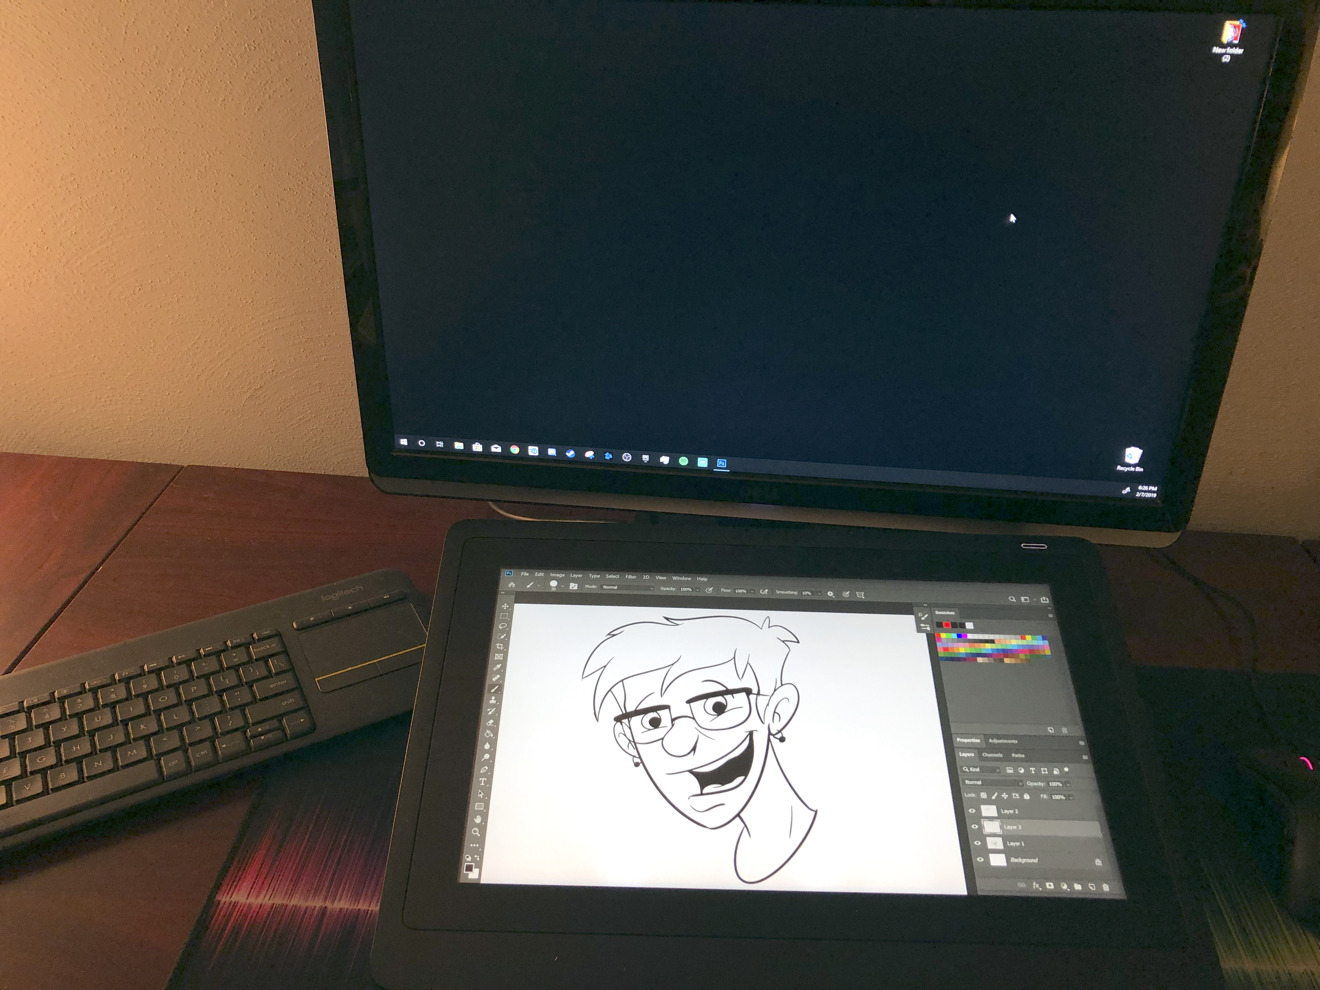 Yes, the Cintiq 16 works on Windows too